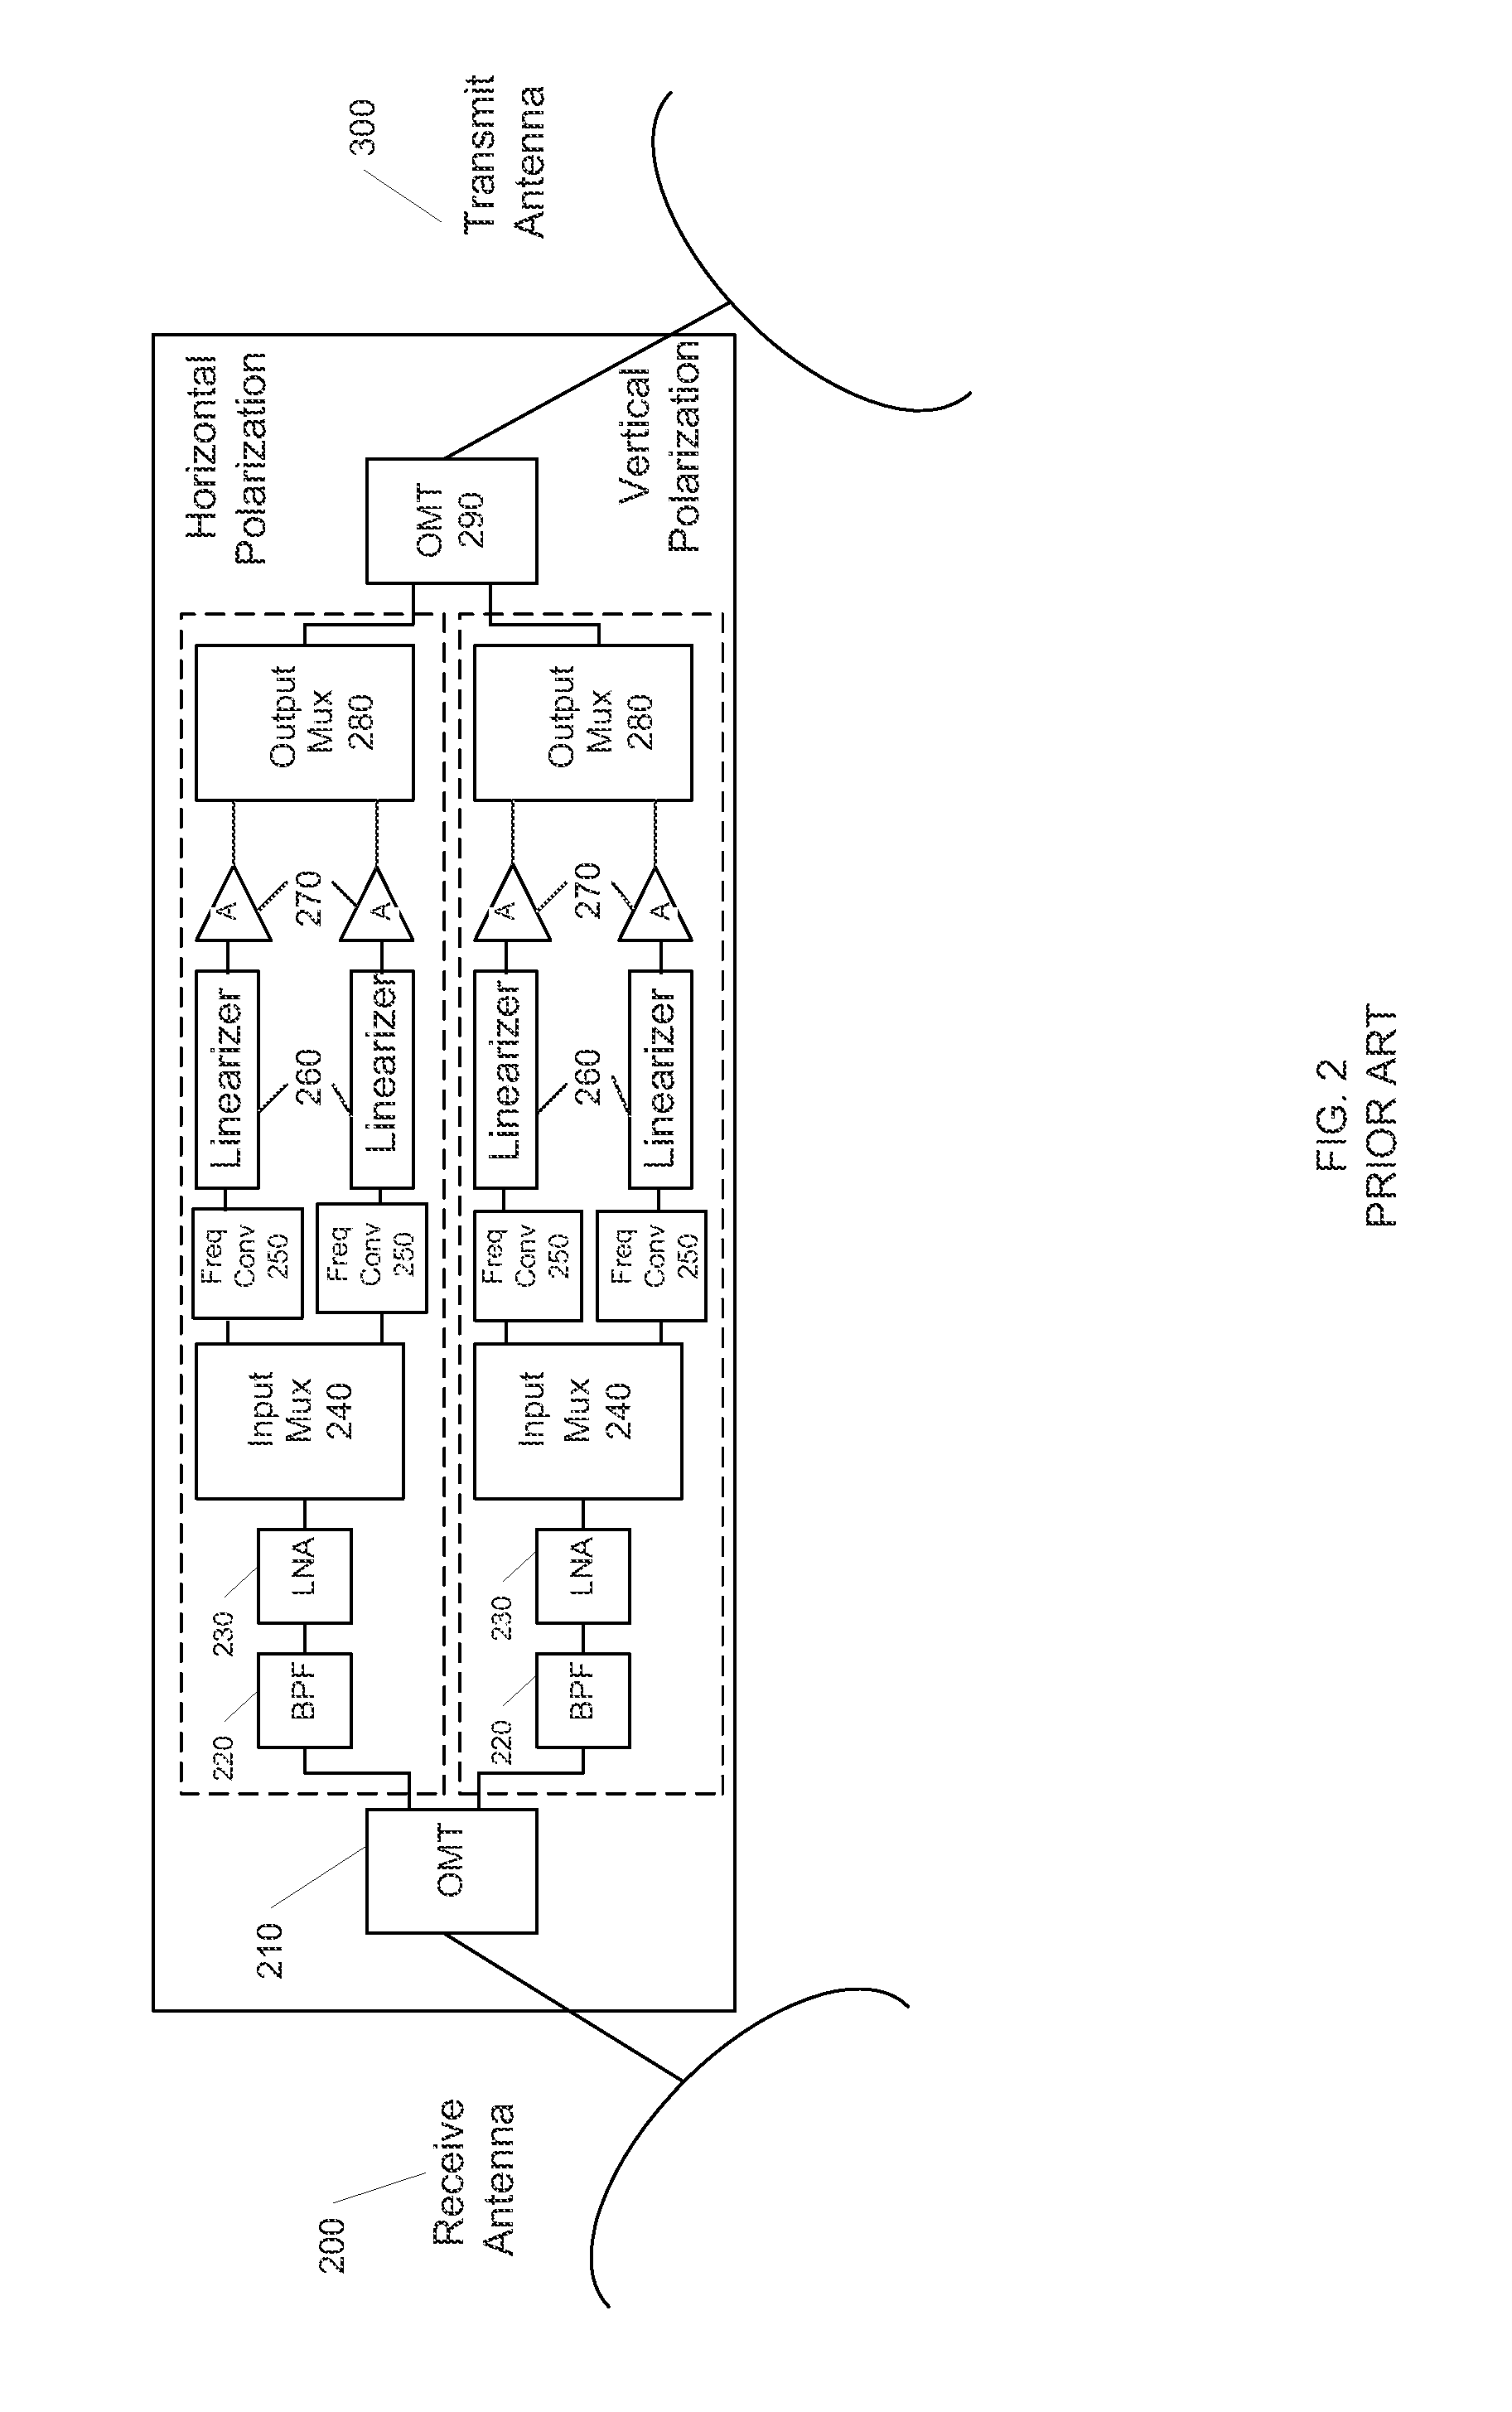 Method and System for Optimizing Performance with Hitless Switching for Fixed Symbol Rate Carriers Using Closed-Loop Power Control while Maintaining Power Equivalent Bandwidth (PEB)